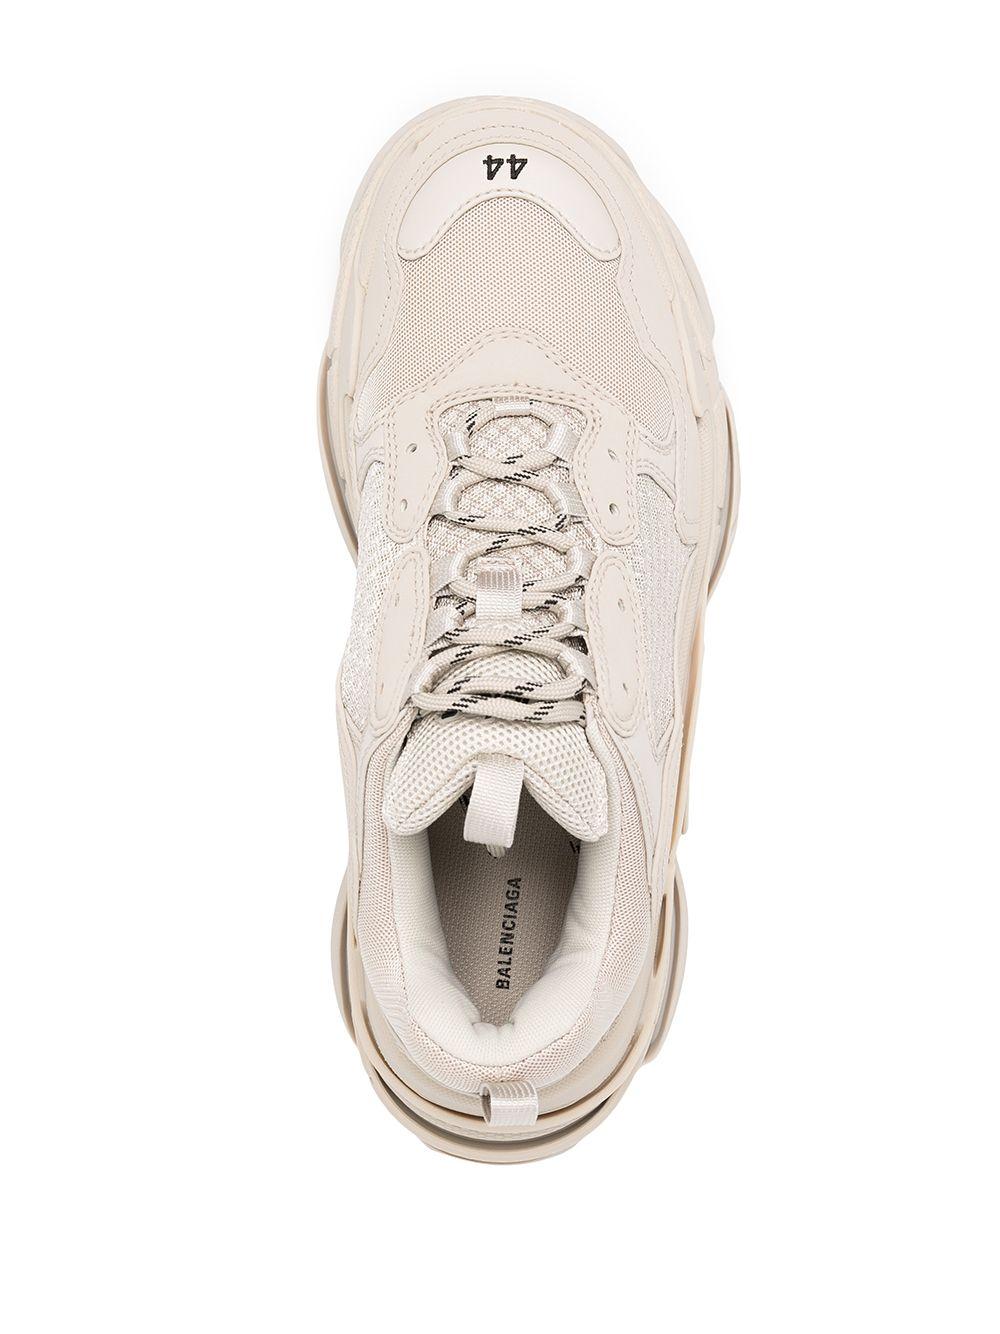 Balenciaga Triple S Low-top Sneakers in White for Men | Lyst